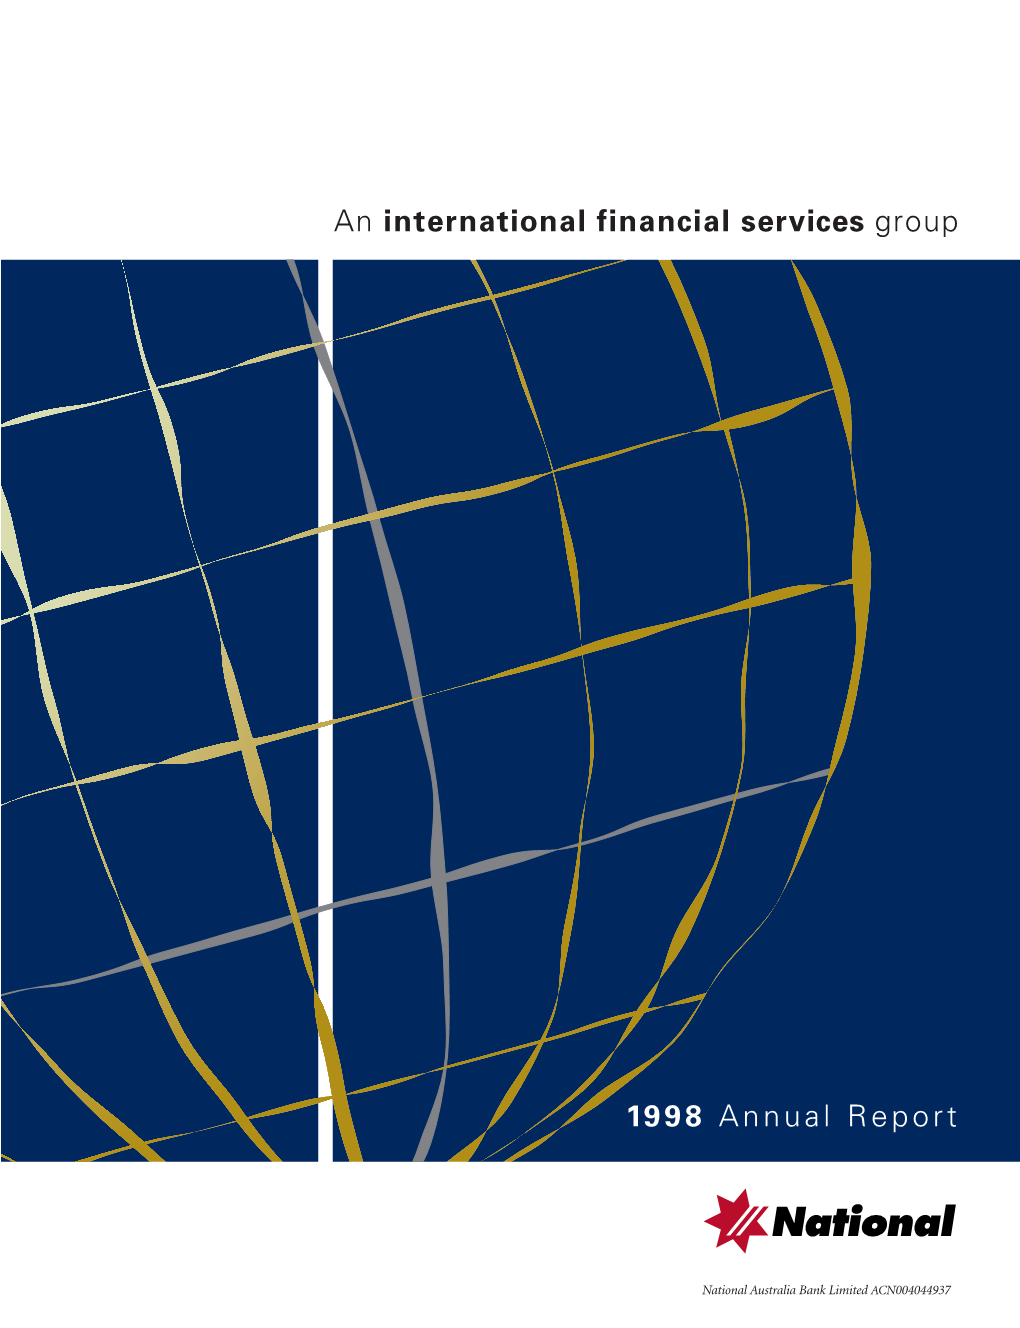 An International Financial Services Group 1998 Annual Report